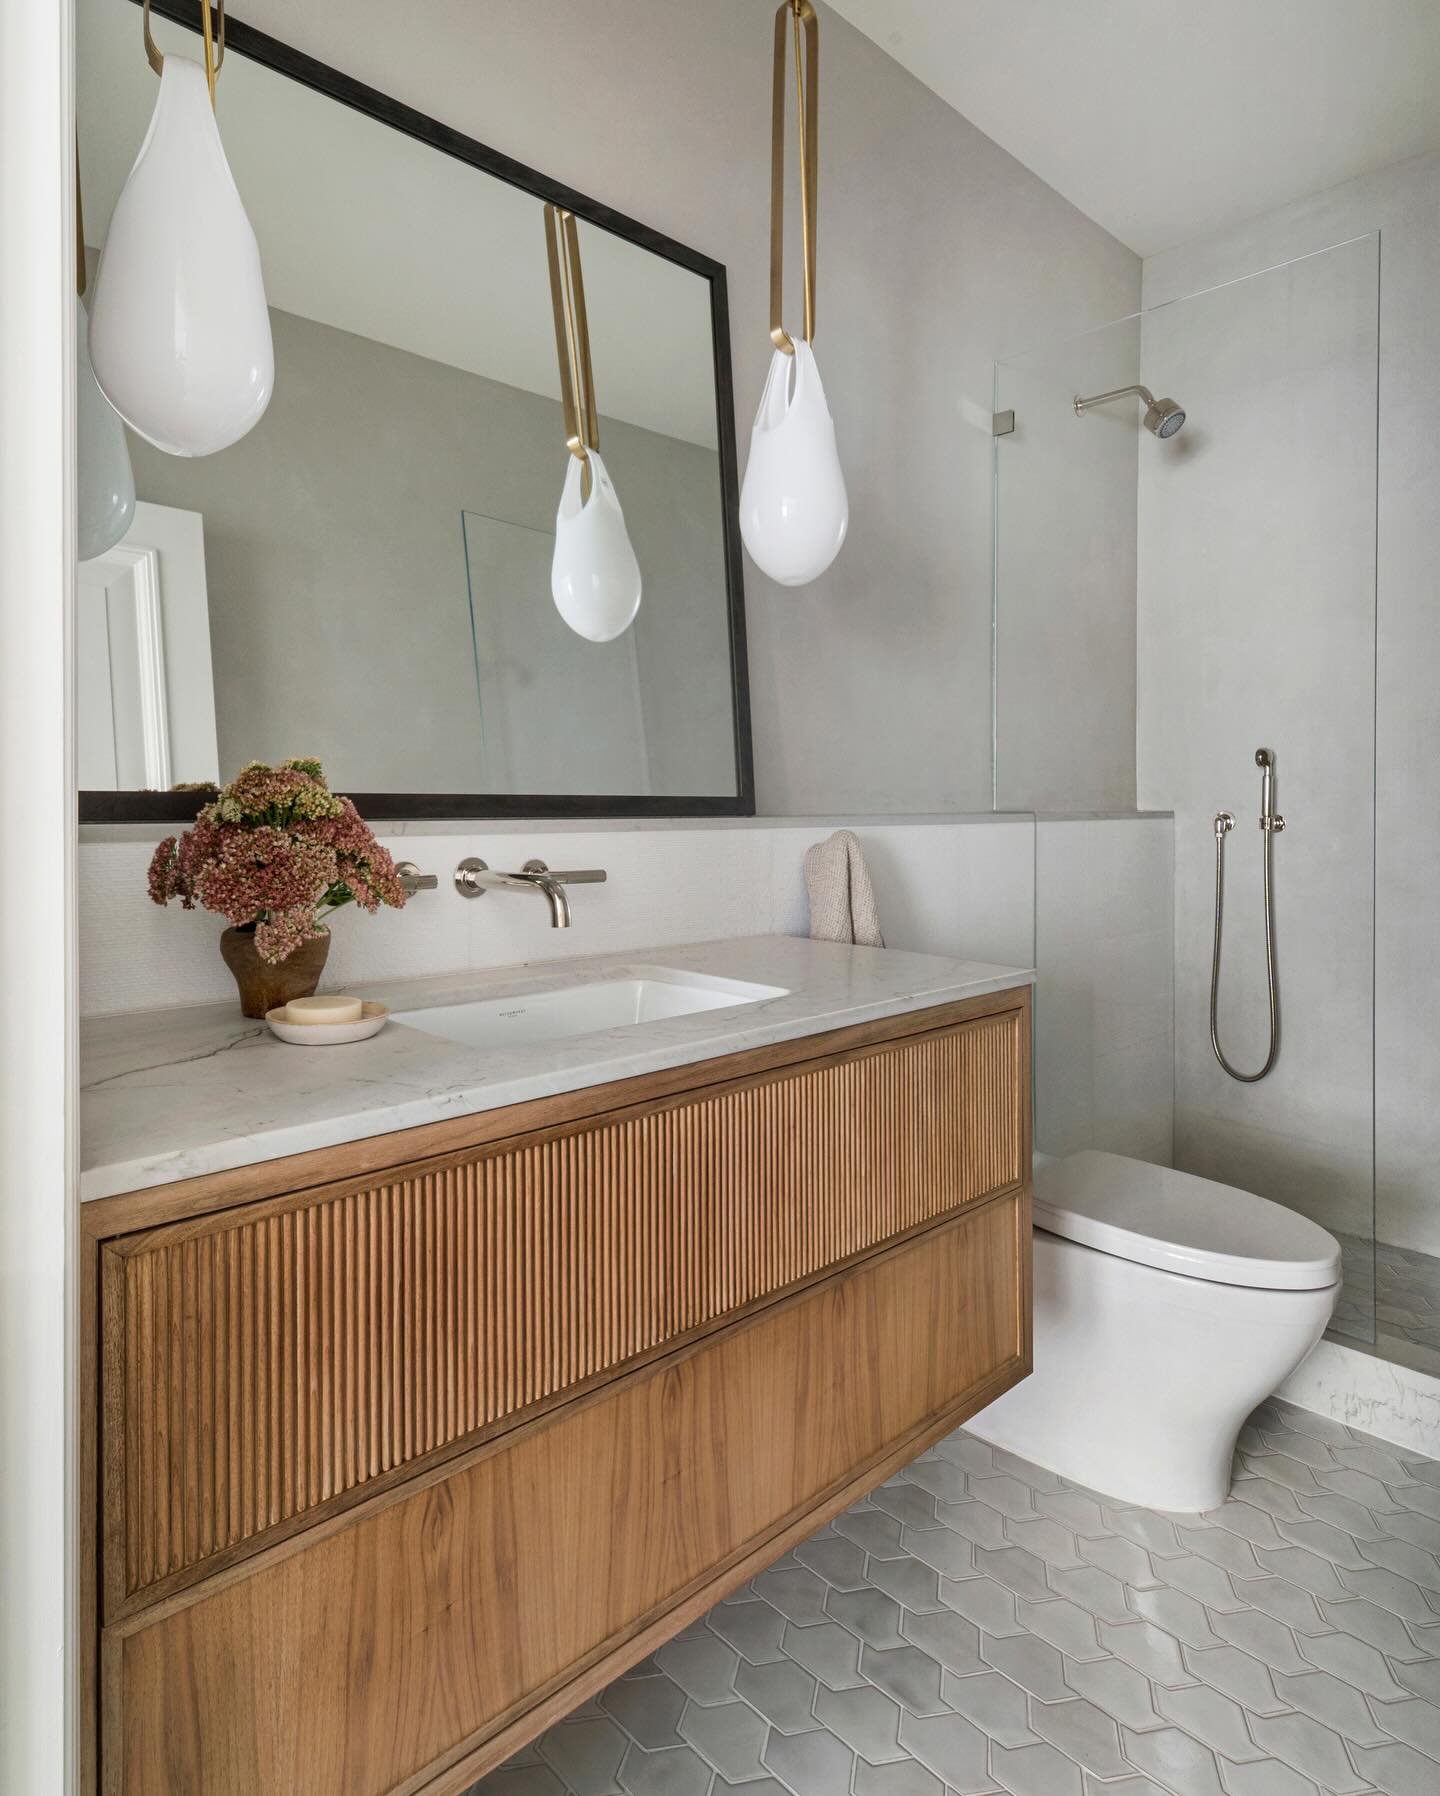 Bleached walnut, waterproof plaster and Thassos marble tiles  in our Corte Madera project. 
Interior Design: @florencechouxlivingston 
Construction: @schalichbrothersconstruction 
Cabinet Maker: @aderynstudio 
Photo: @daviddlivingston 
.
.
.
#bathroo